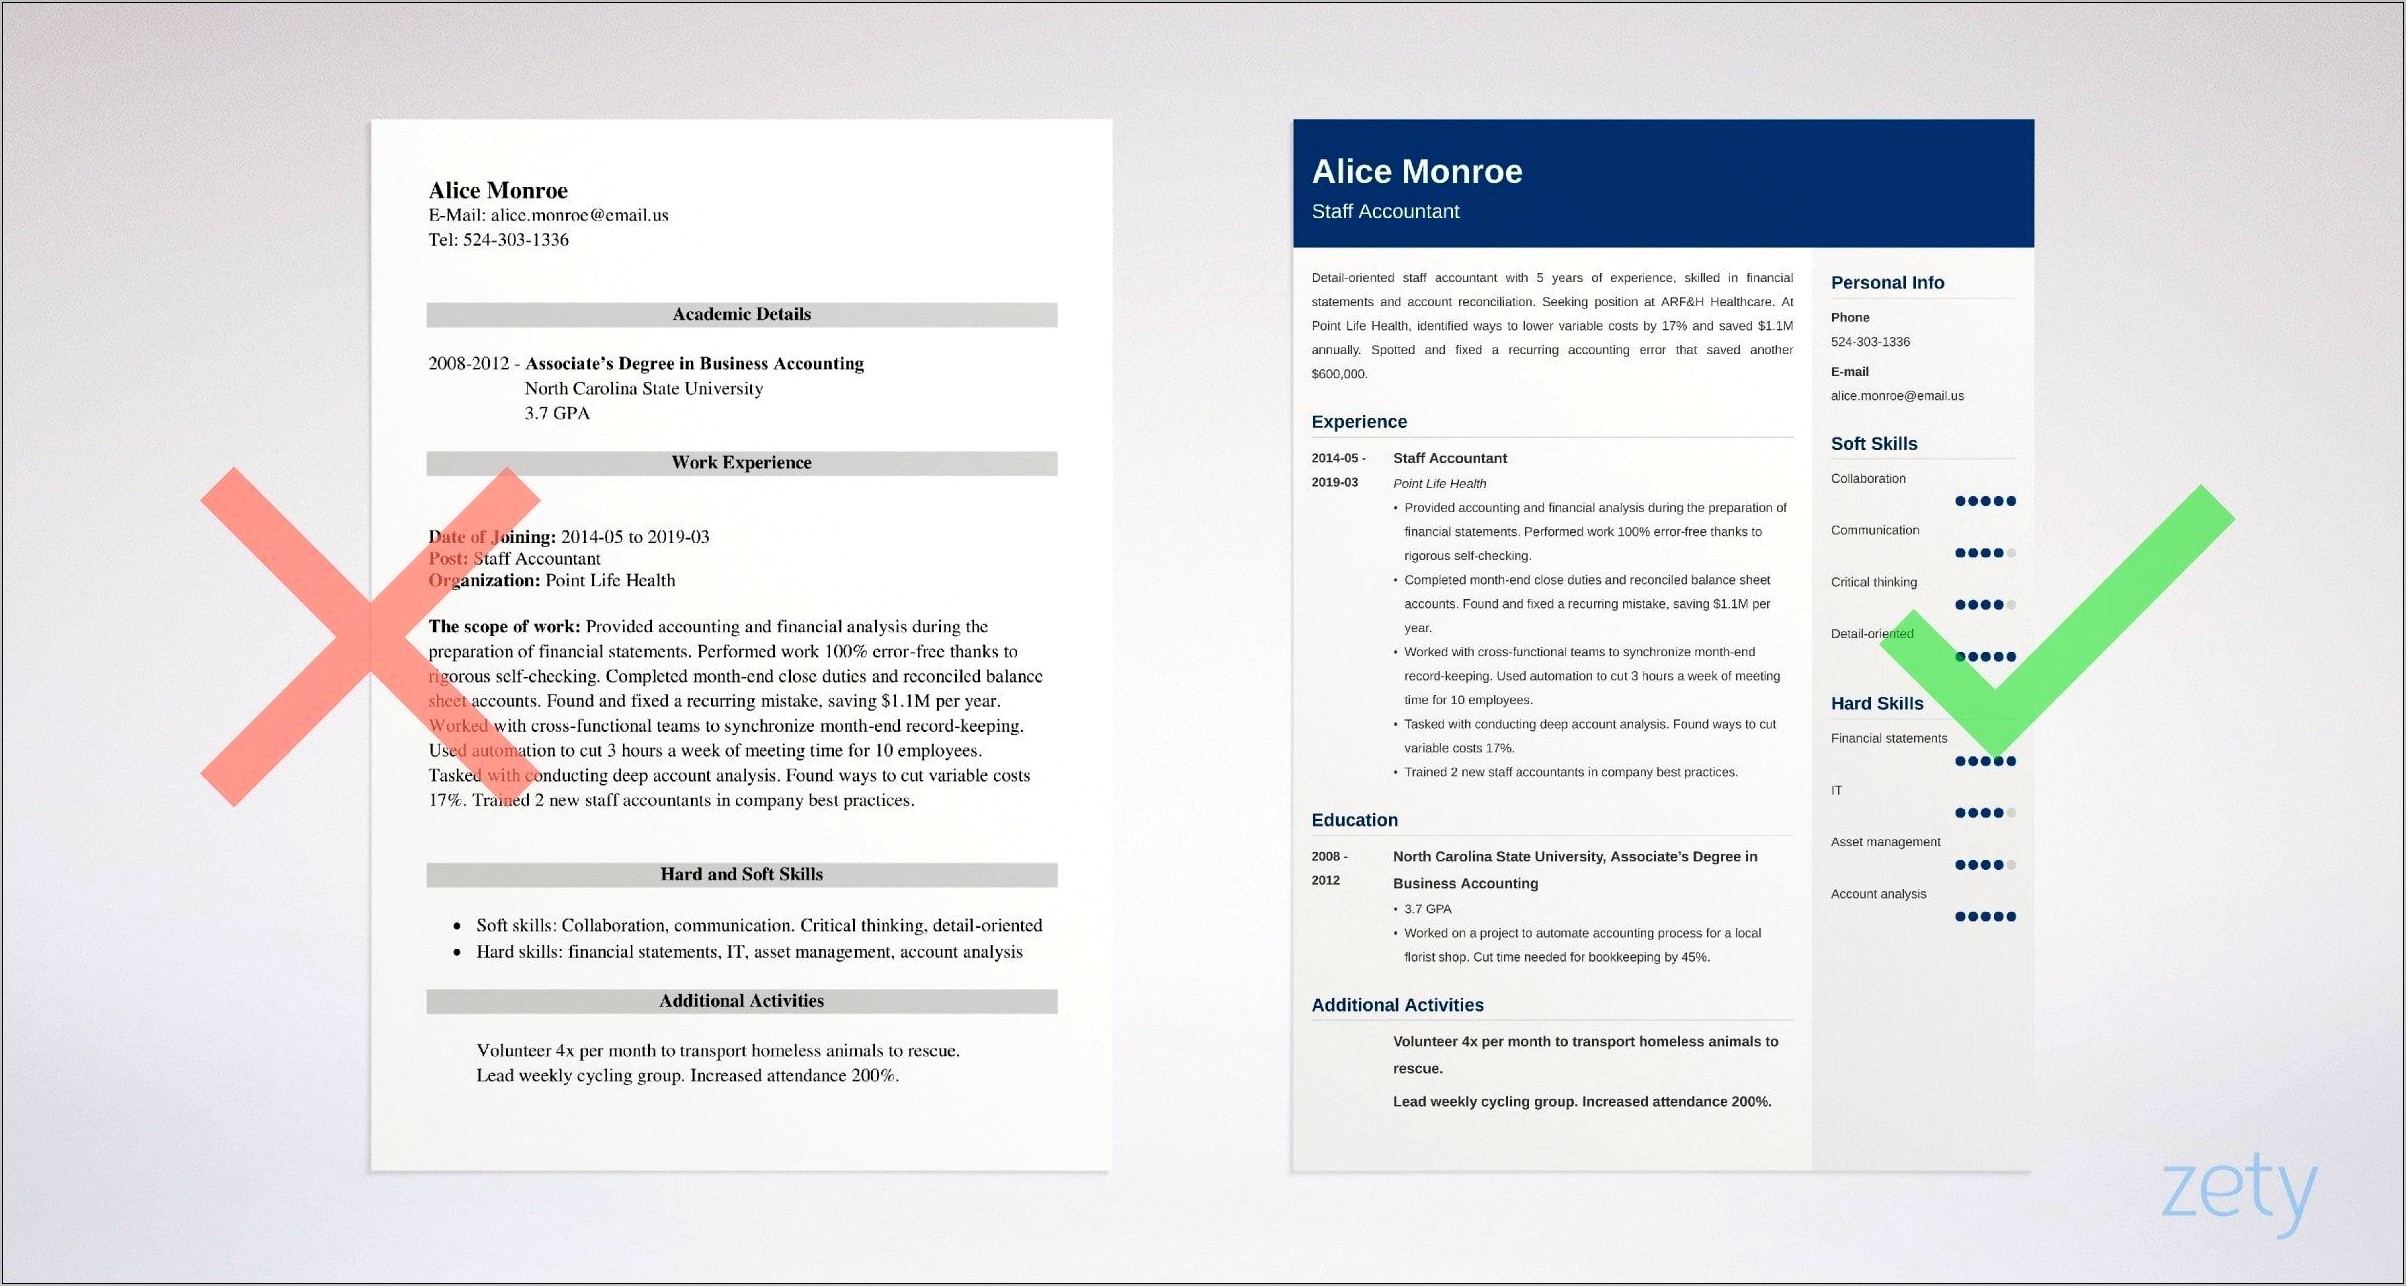 Sample Resume Titles For Staff Accountant